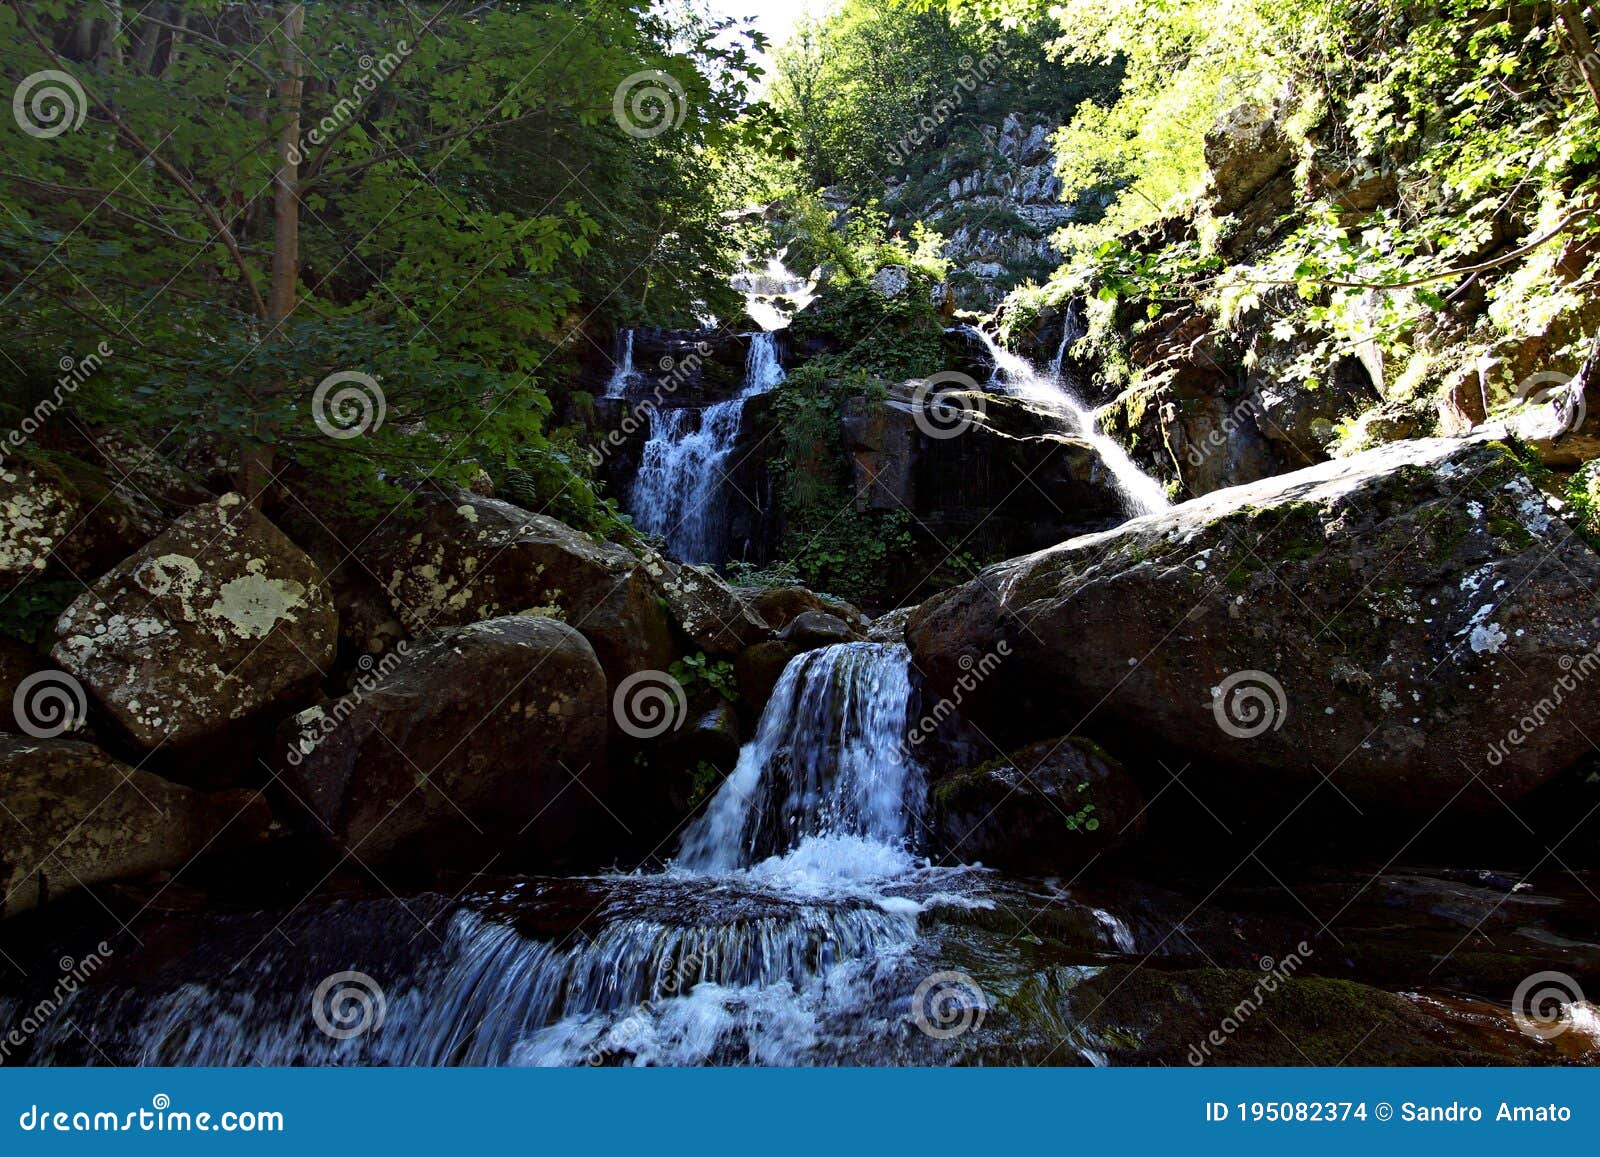 the dardagna waterfalls are located in the upper bolognese apennines